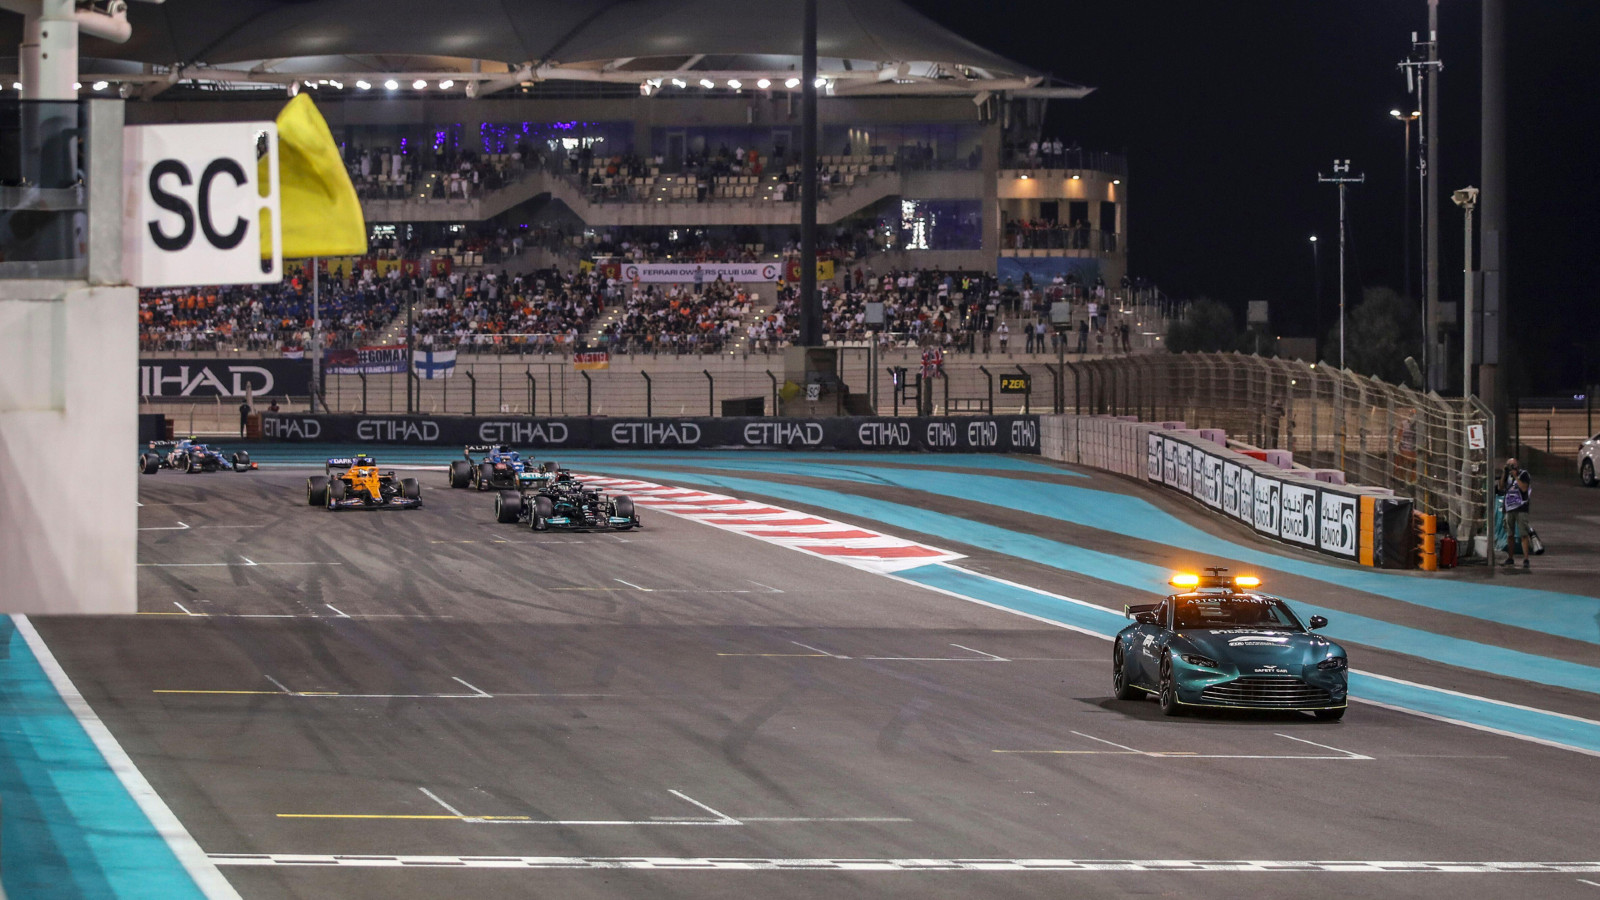 The Safety Car leads Mercedes driver Lewis Hamilton and Red Bull driver Max Verstappen at the 2021 Abu Dhabi Grand Prix. Yas Marina, December 2021.